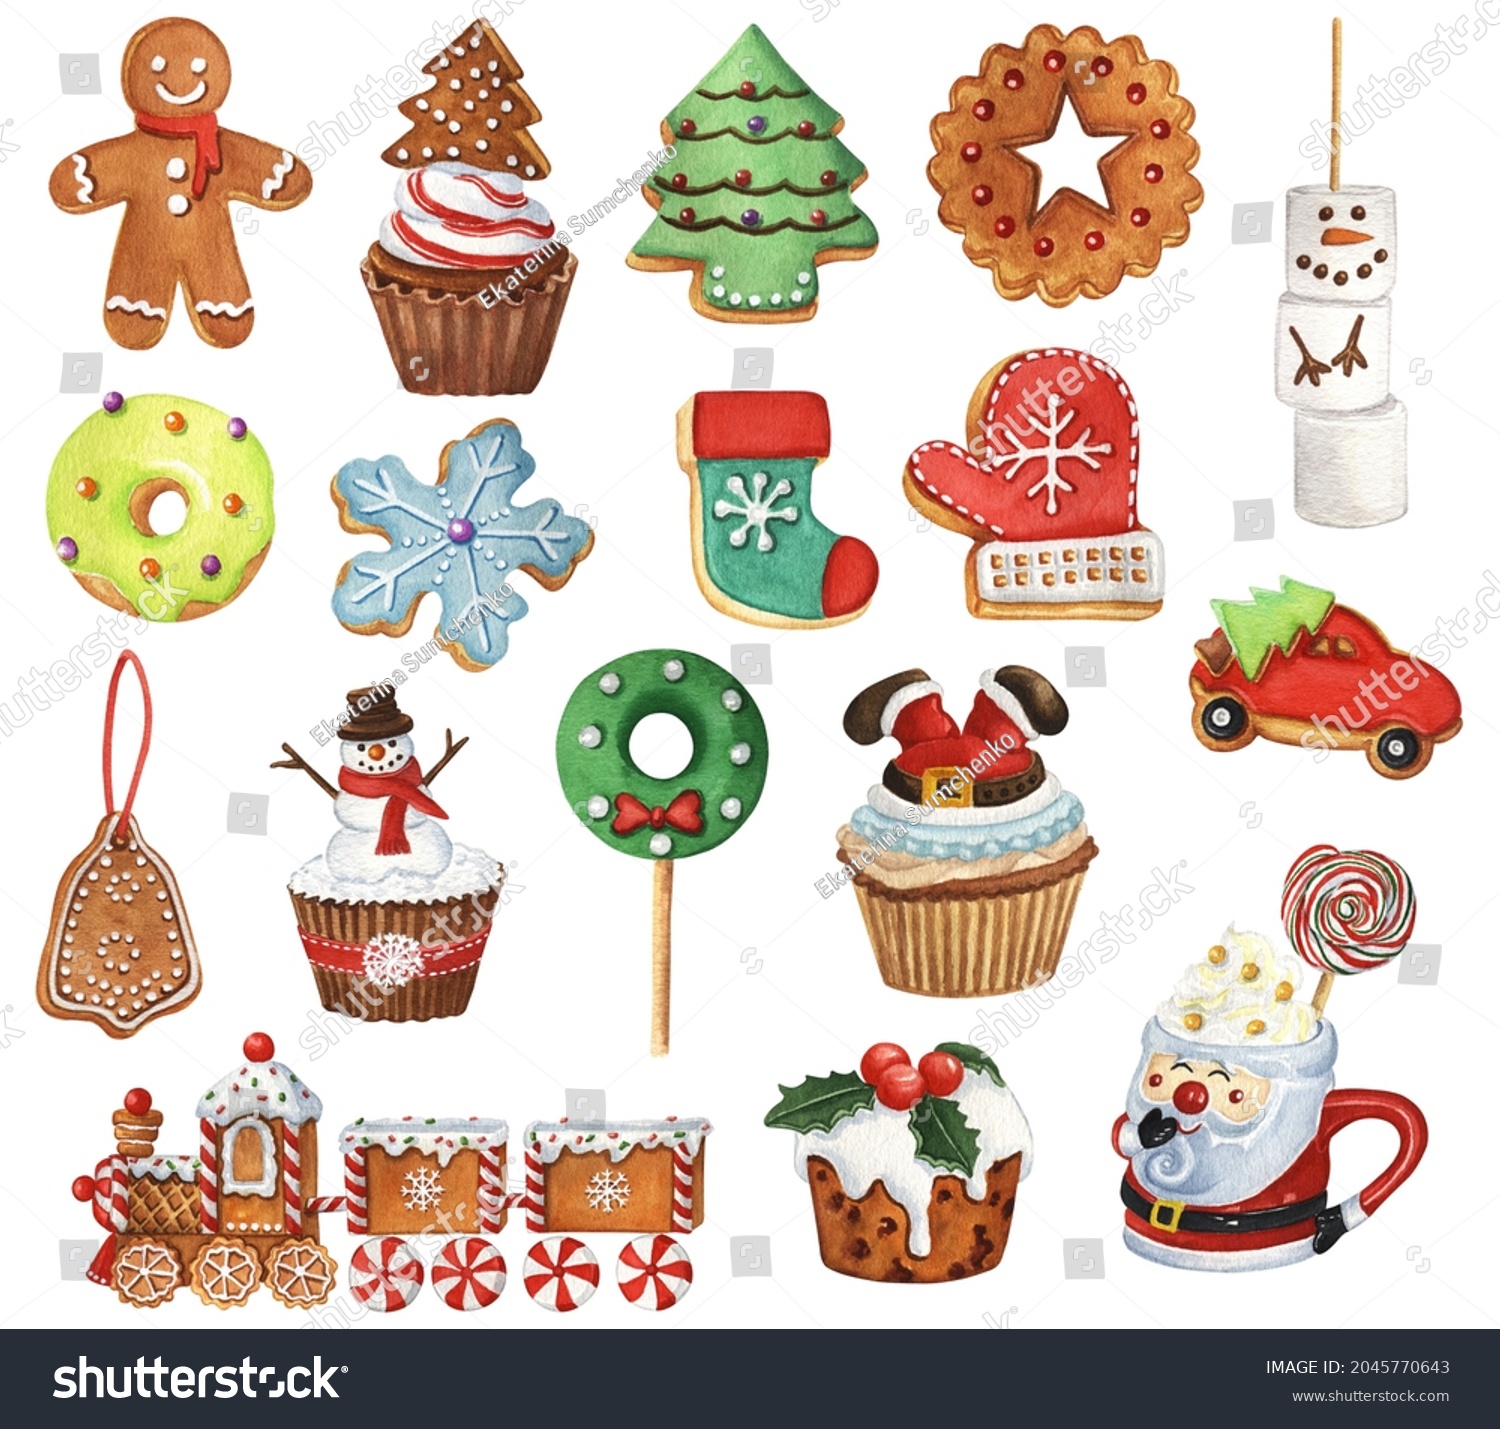 Scrapbooking Clip Art & Image Files Sweets Clipart Christmas Gnomes ...